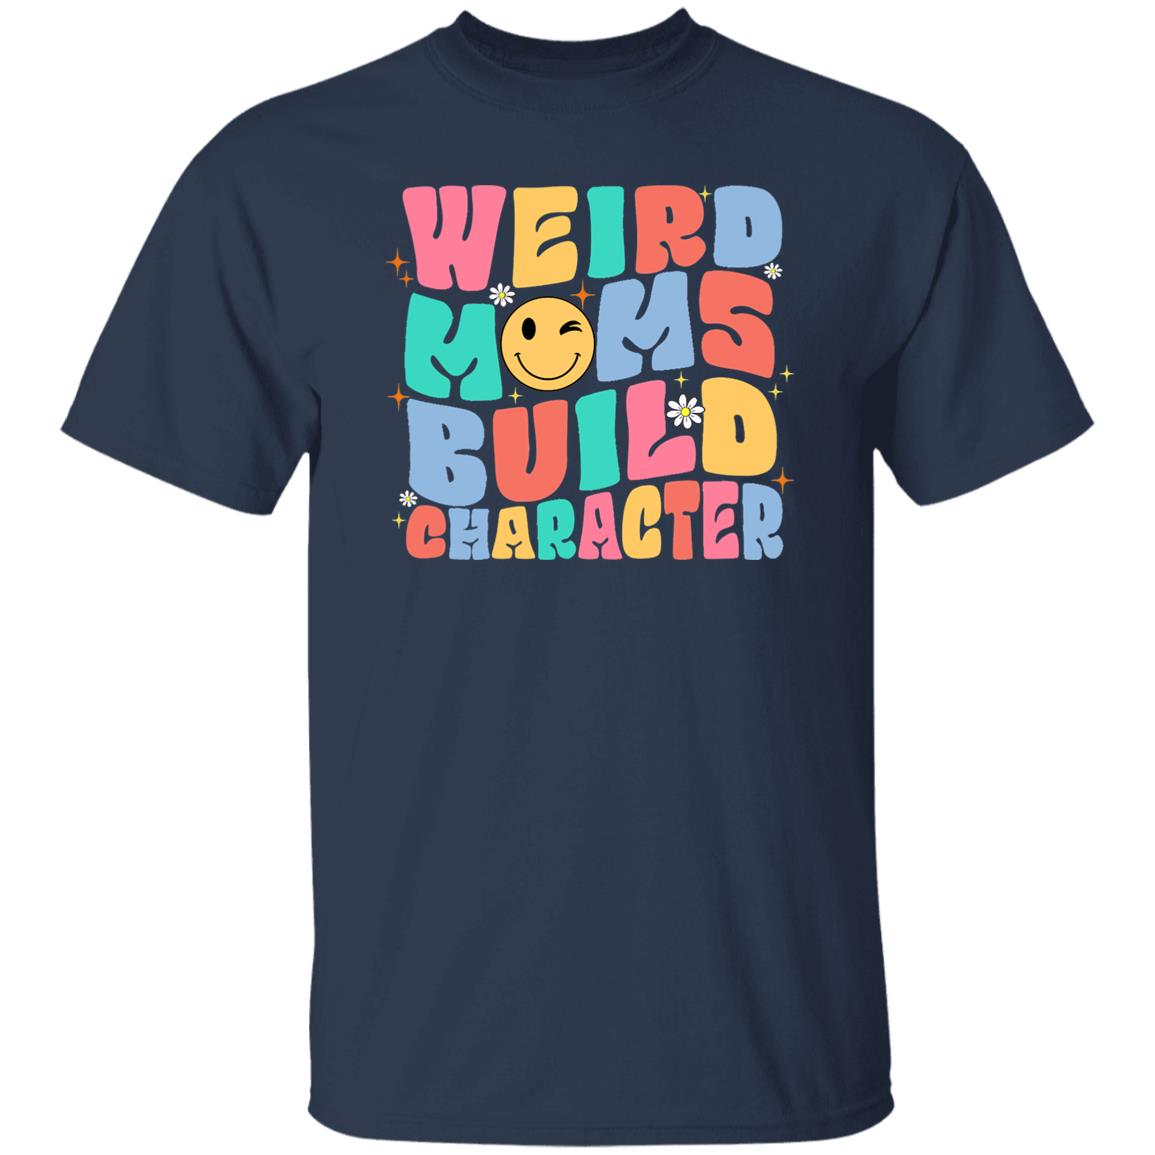 Groovy Weird Moms Build Character Tee Shirt For Mother's Day